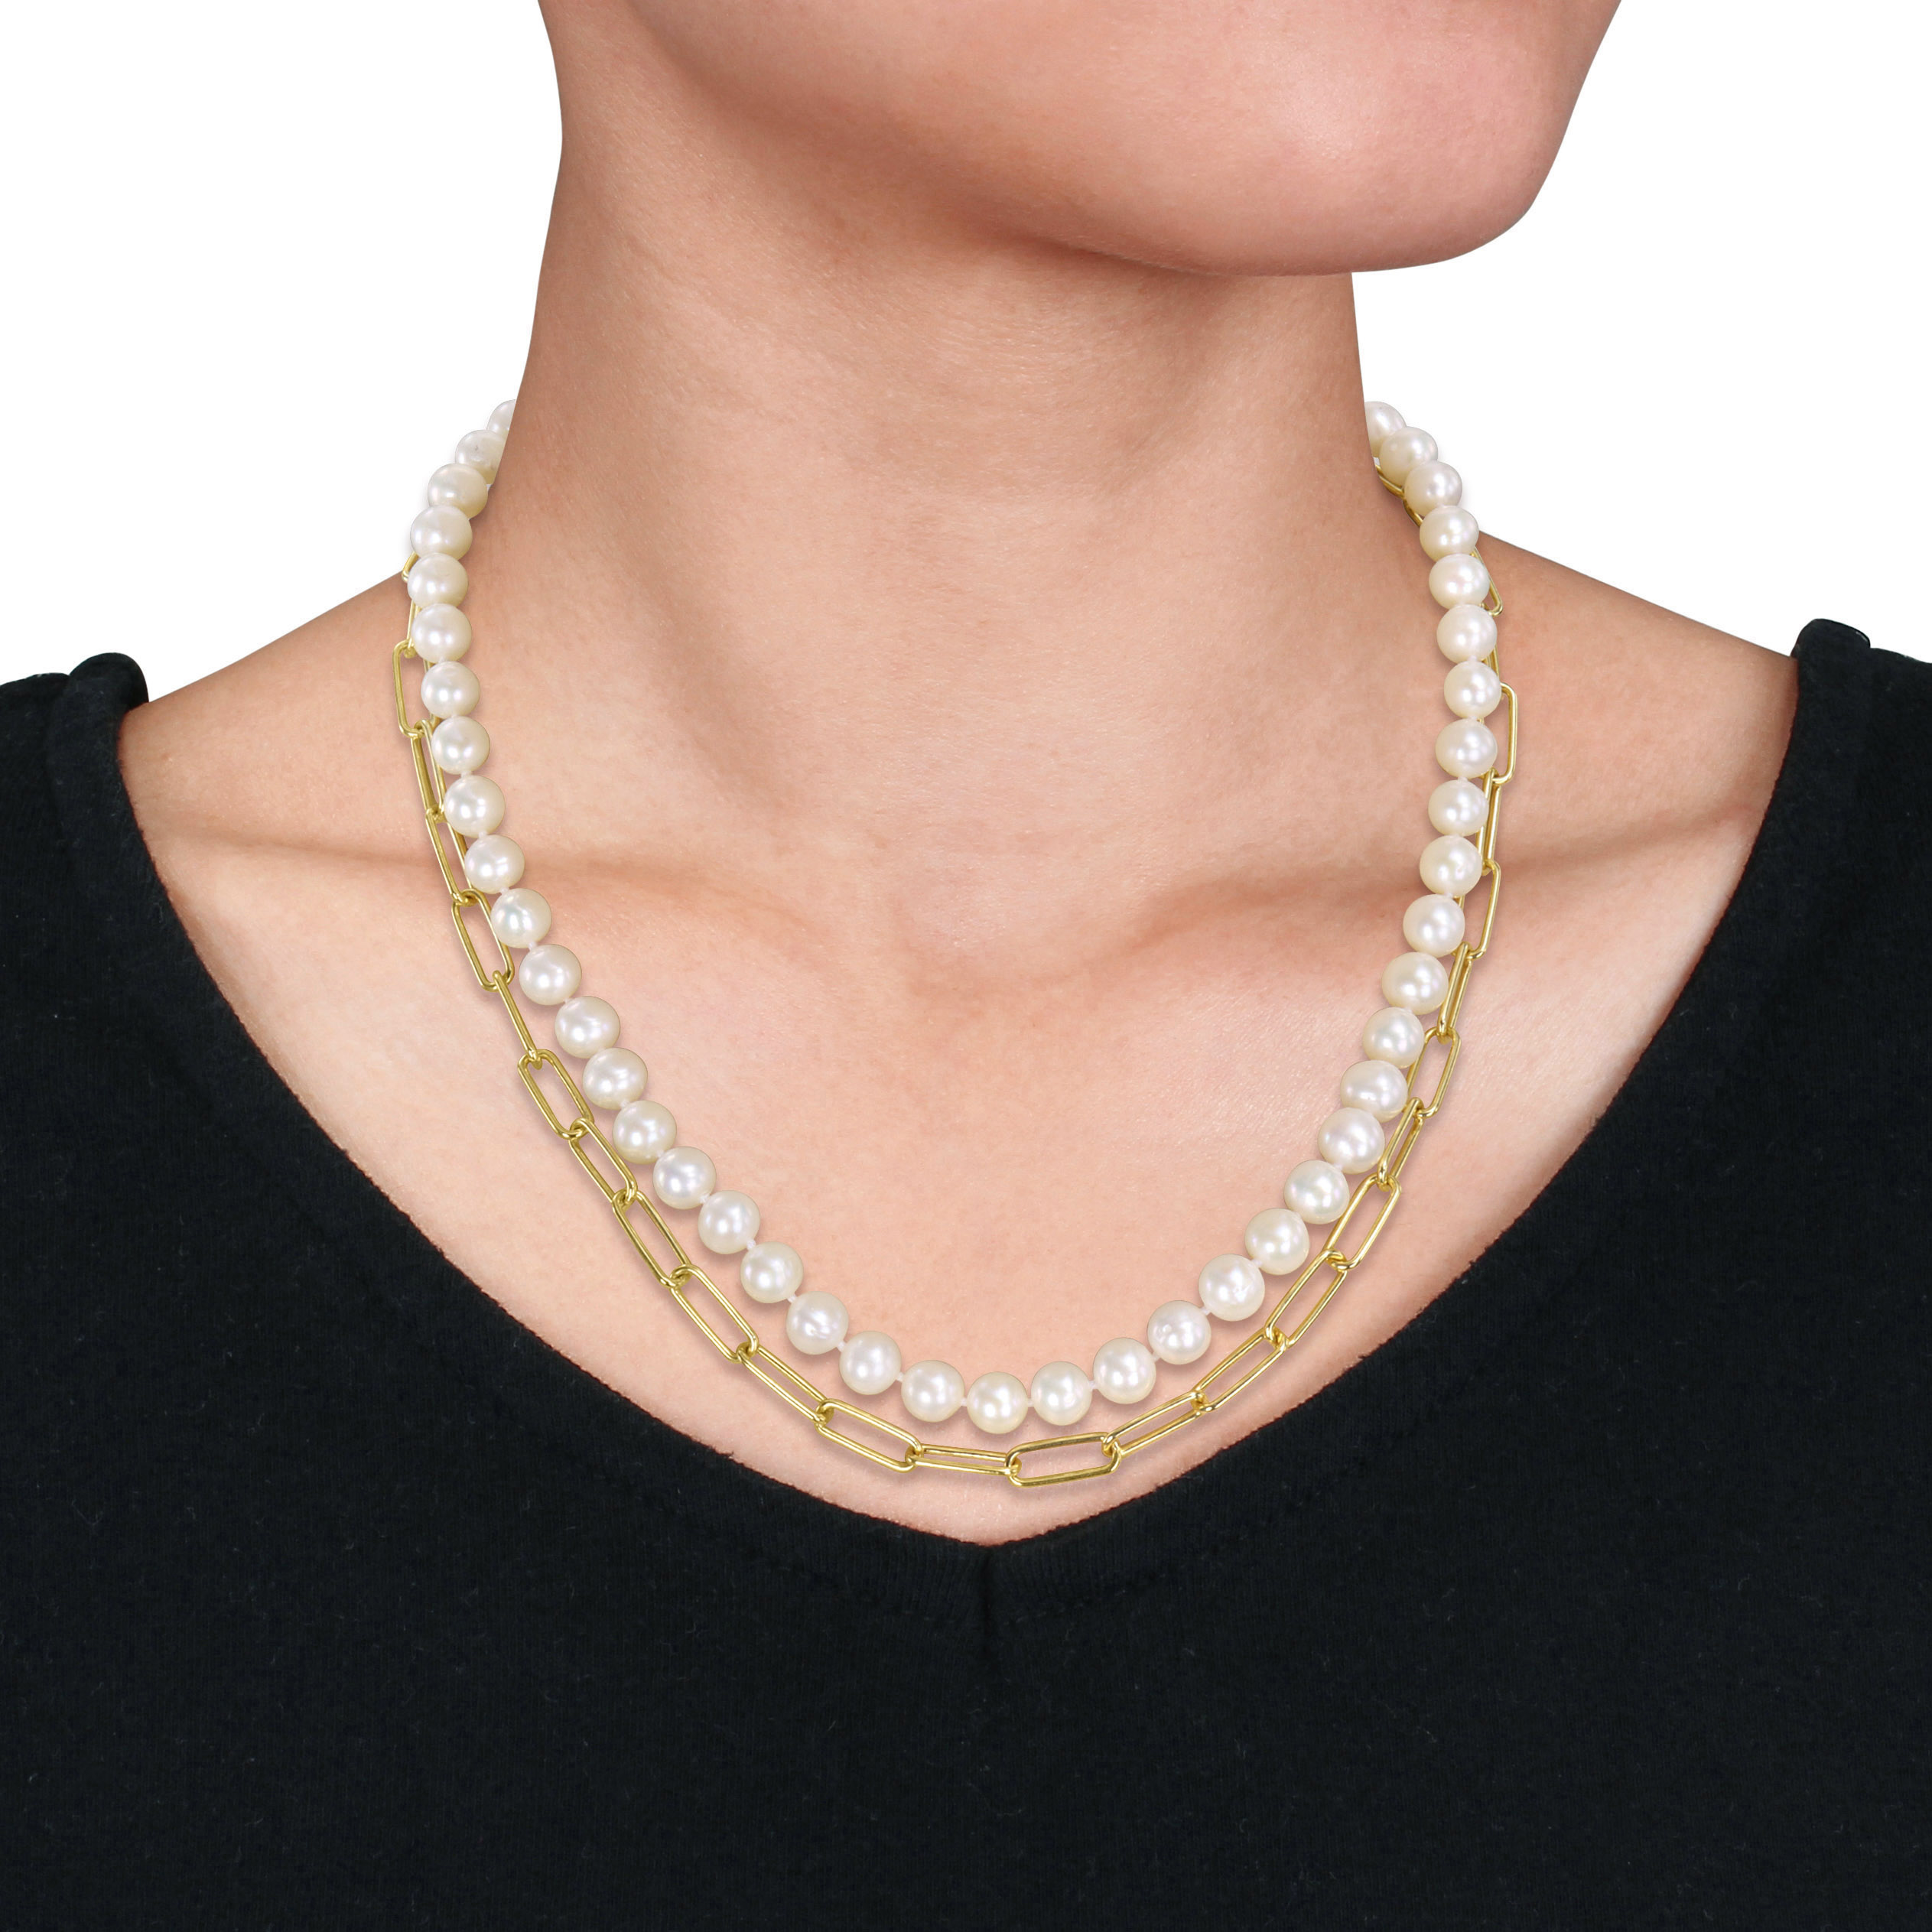 7-7.5 MM Cultured Freshwater Pearl and 5 MM Link Chain Layered Necklace in 18k Yellow Gold Plated Sterling Silver - 18 in.